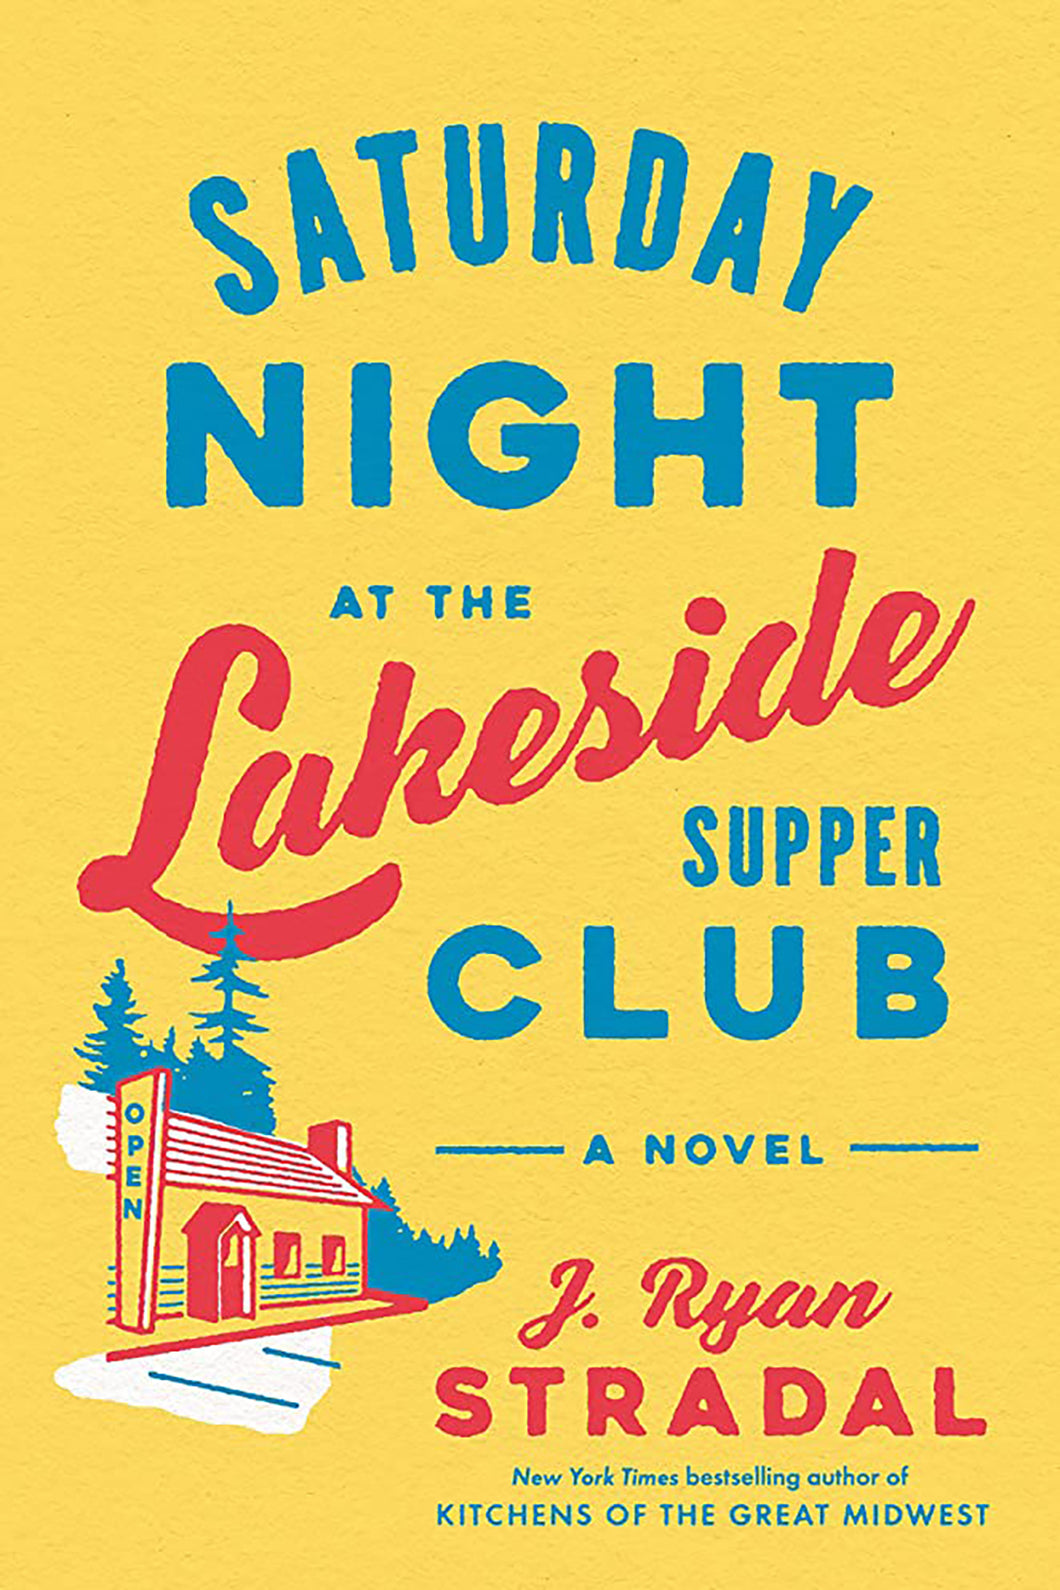 Saturday Night at the Lakeside Supper Club by J. Ryan Stradal / BOOK OR BUNDLE - Starting at $28!